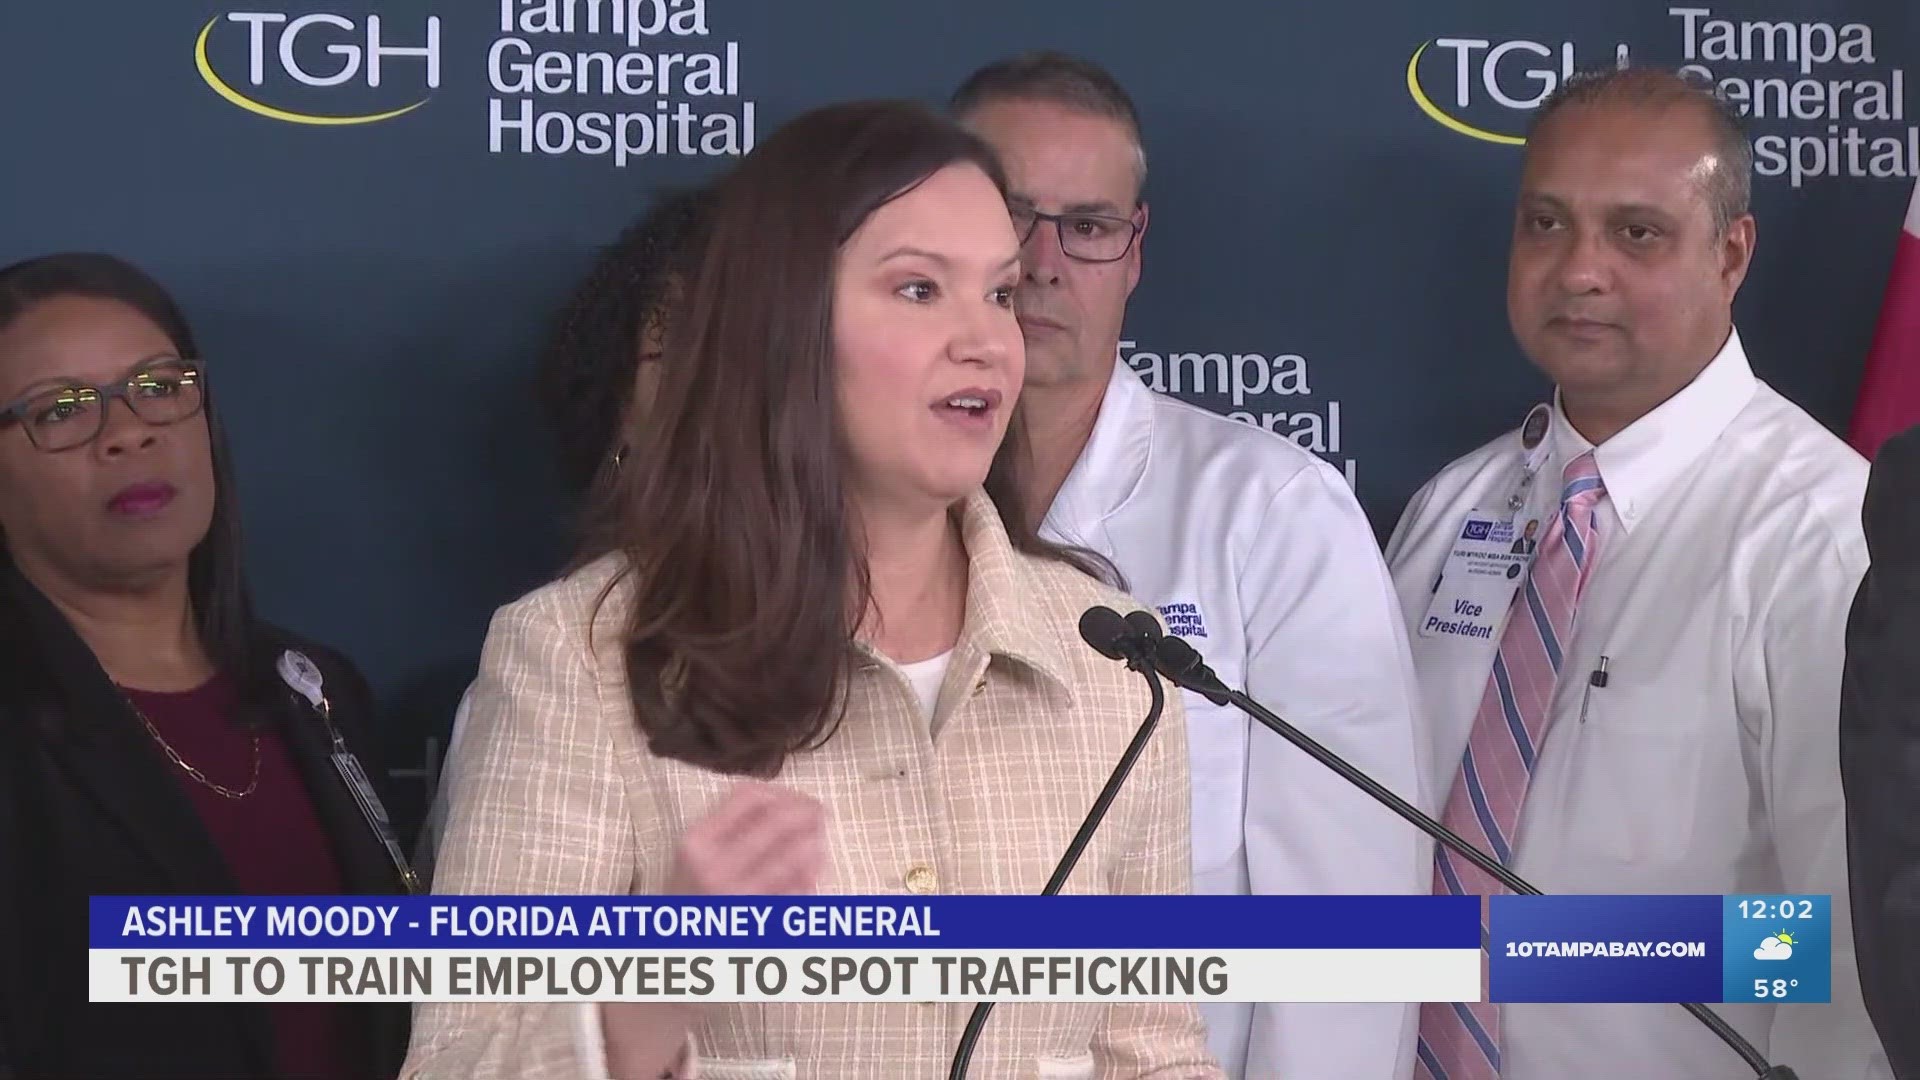 Florida AG Ashley Moody joined TGH officials to explain a new means of helping trafficking victims looking for medical help.